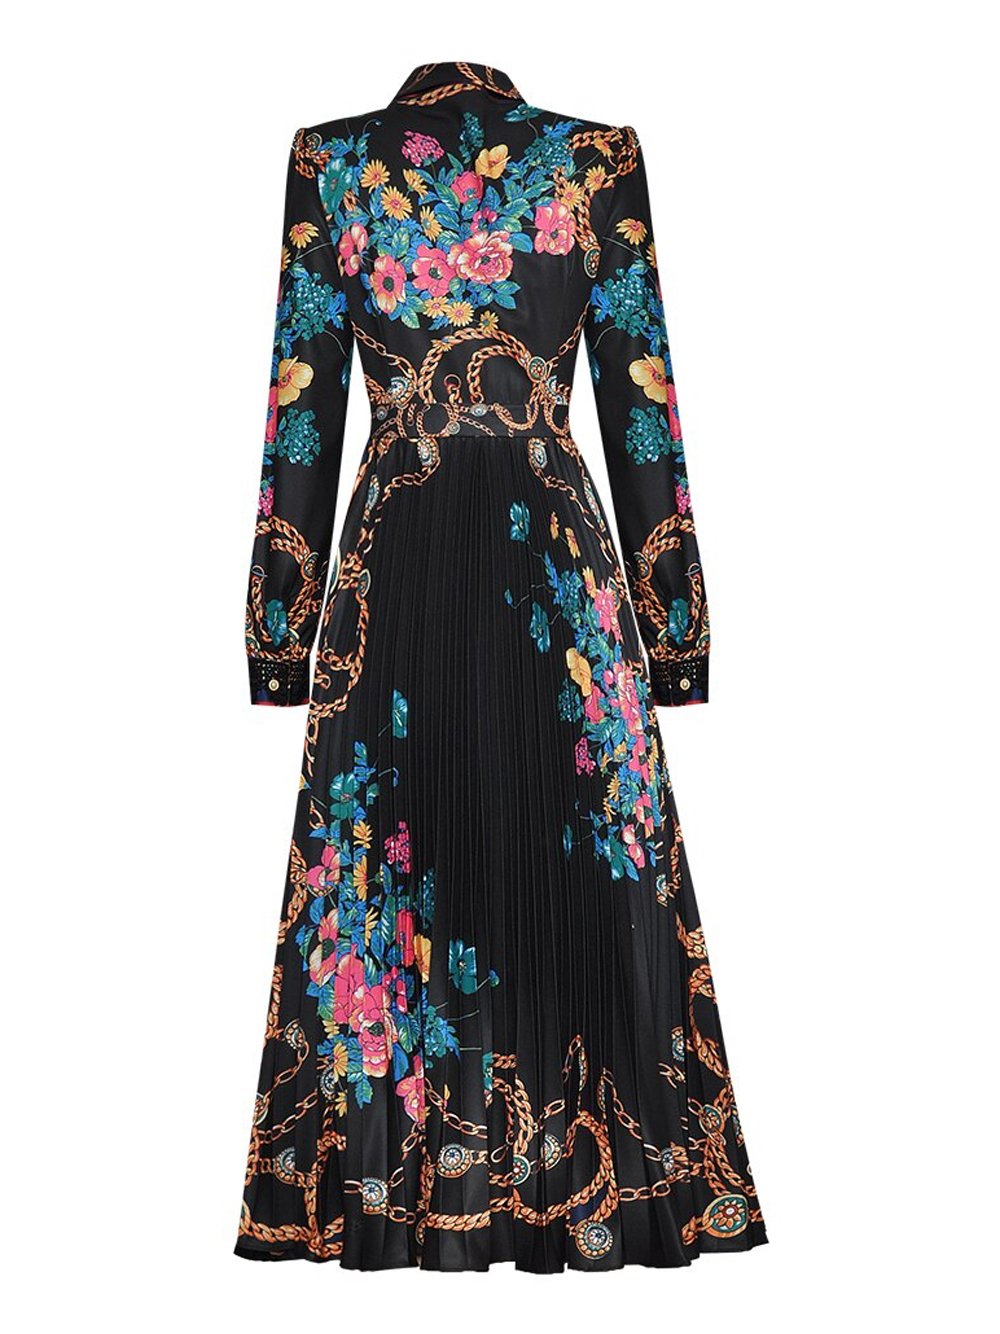 TERESE Bow Floral Pleated Midi Dress